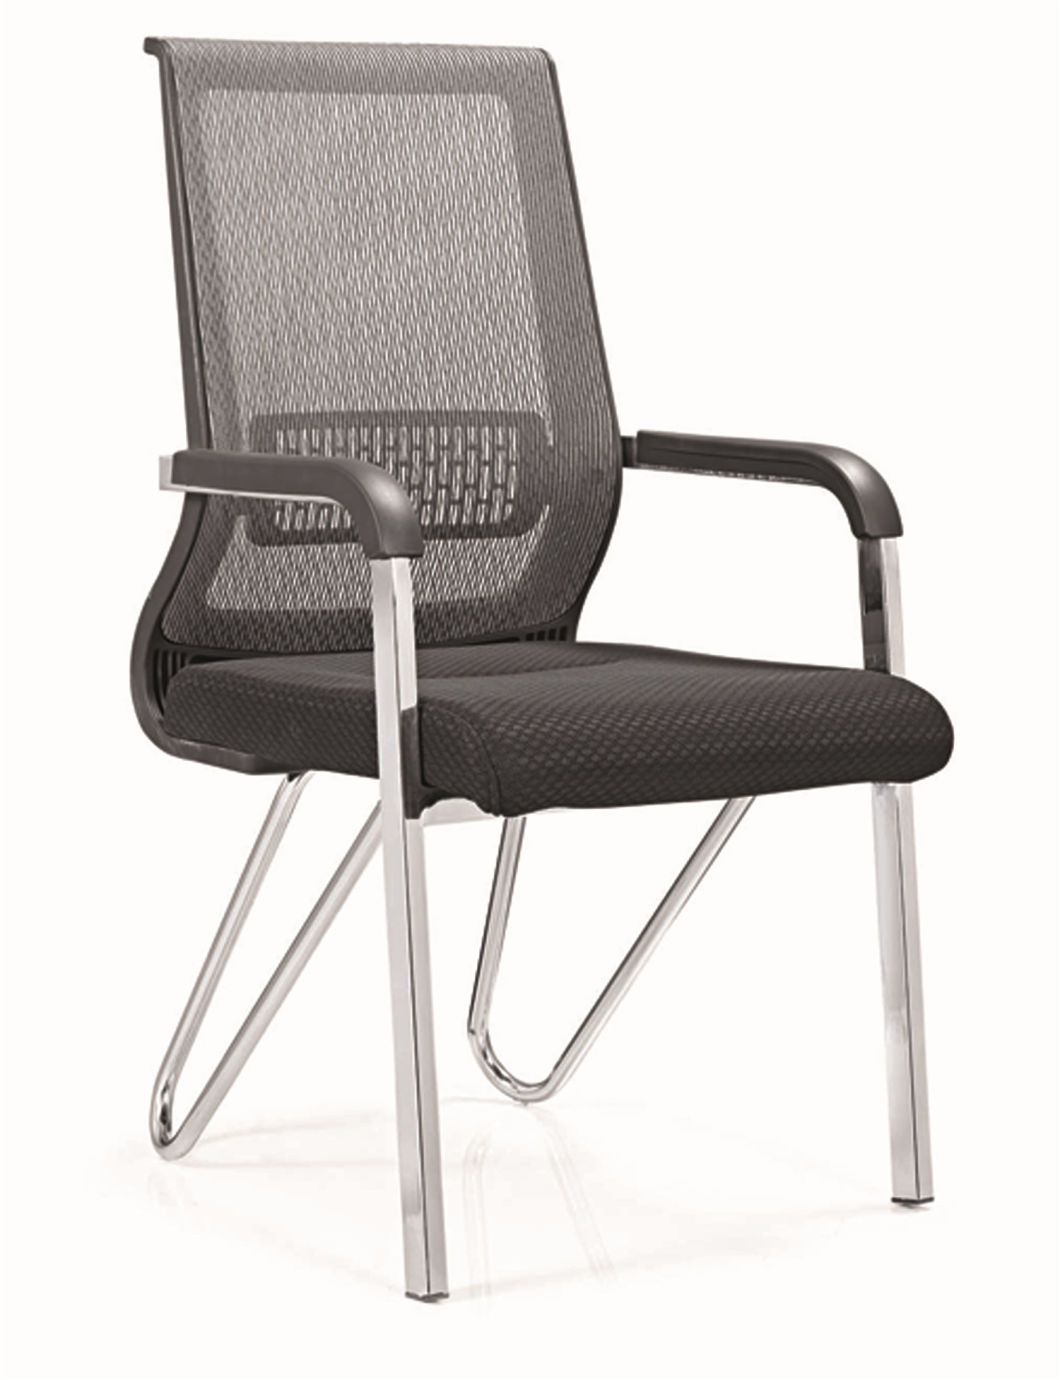 Affordable Special Legs Mesh Metal Fixed Staff Computer PP Desk Chair